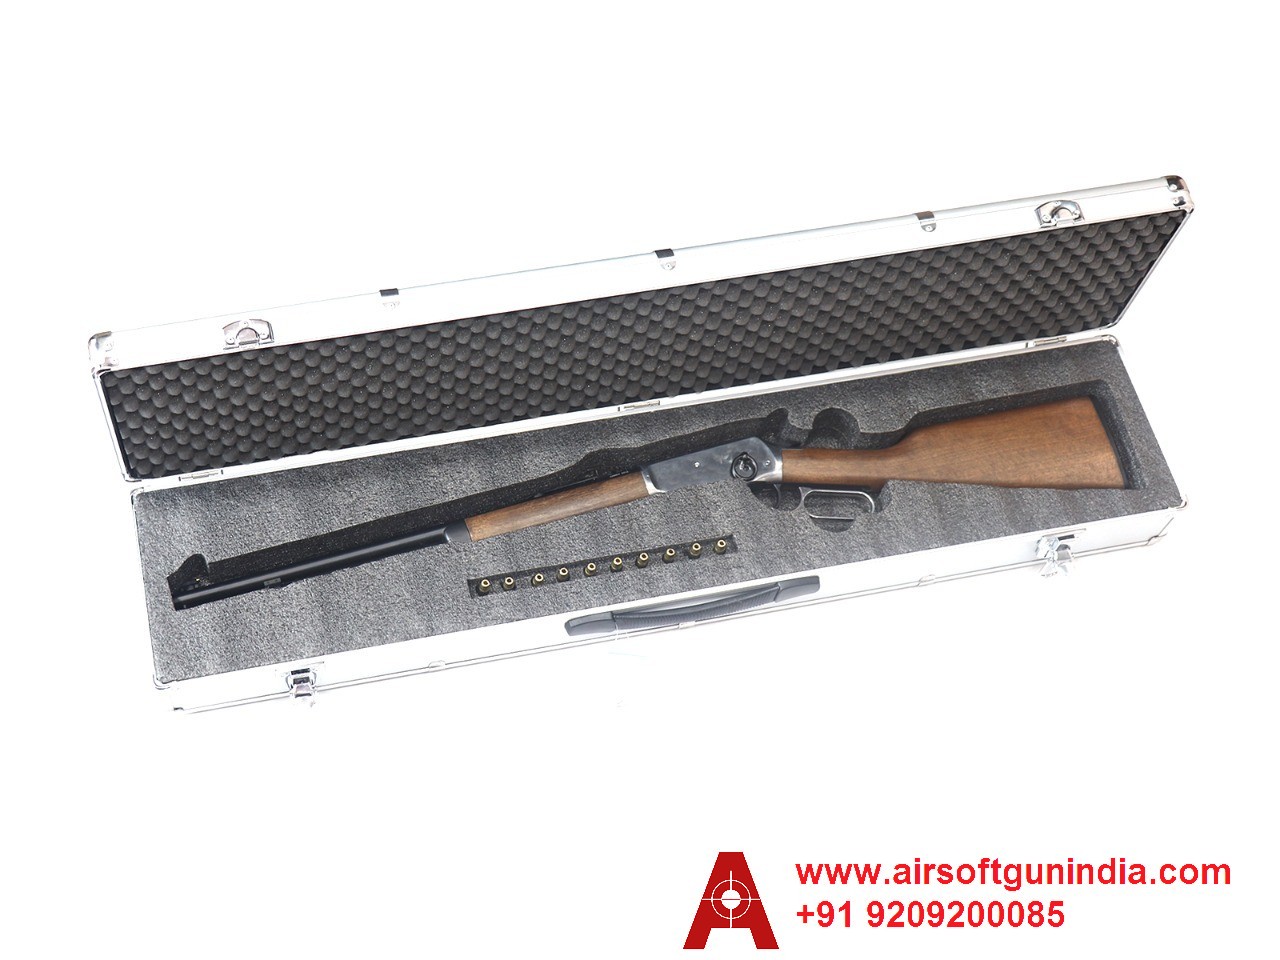 Customized Rifle Case For Legends Cowboy Shell Ejecting Rifle By Airsoft Gun India